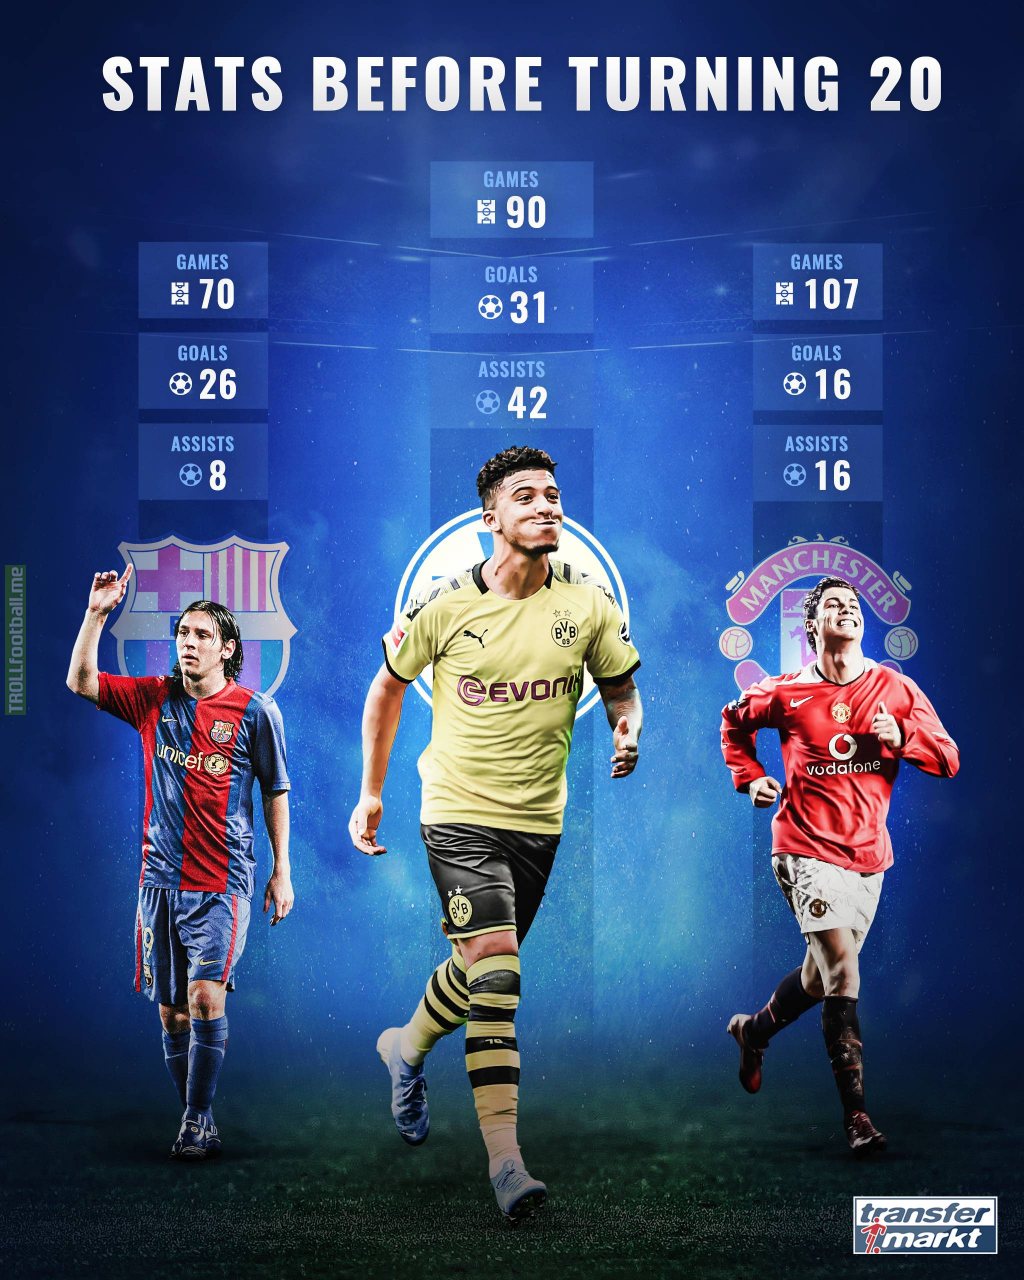 Jadon Sancho turned 20 years old yesterday. Since his move to Borussia Dortmund from Manchester City in August 2018, he has scored 31 and assisted 42 goals in 90 games for the club. For comparison, Messi had 26 goals/8 assists (70 games) and Ronaldo 16 goals/16 assists (107 games) before turning 20